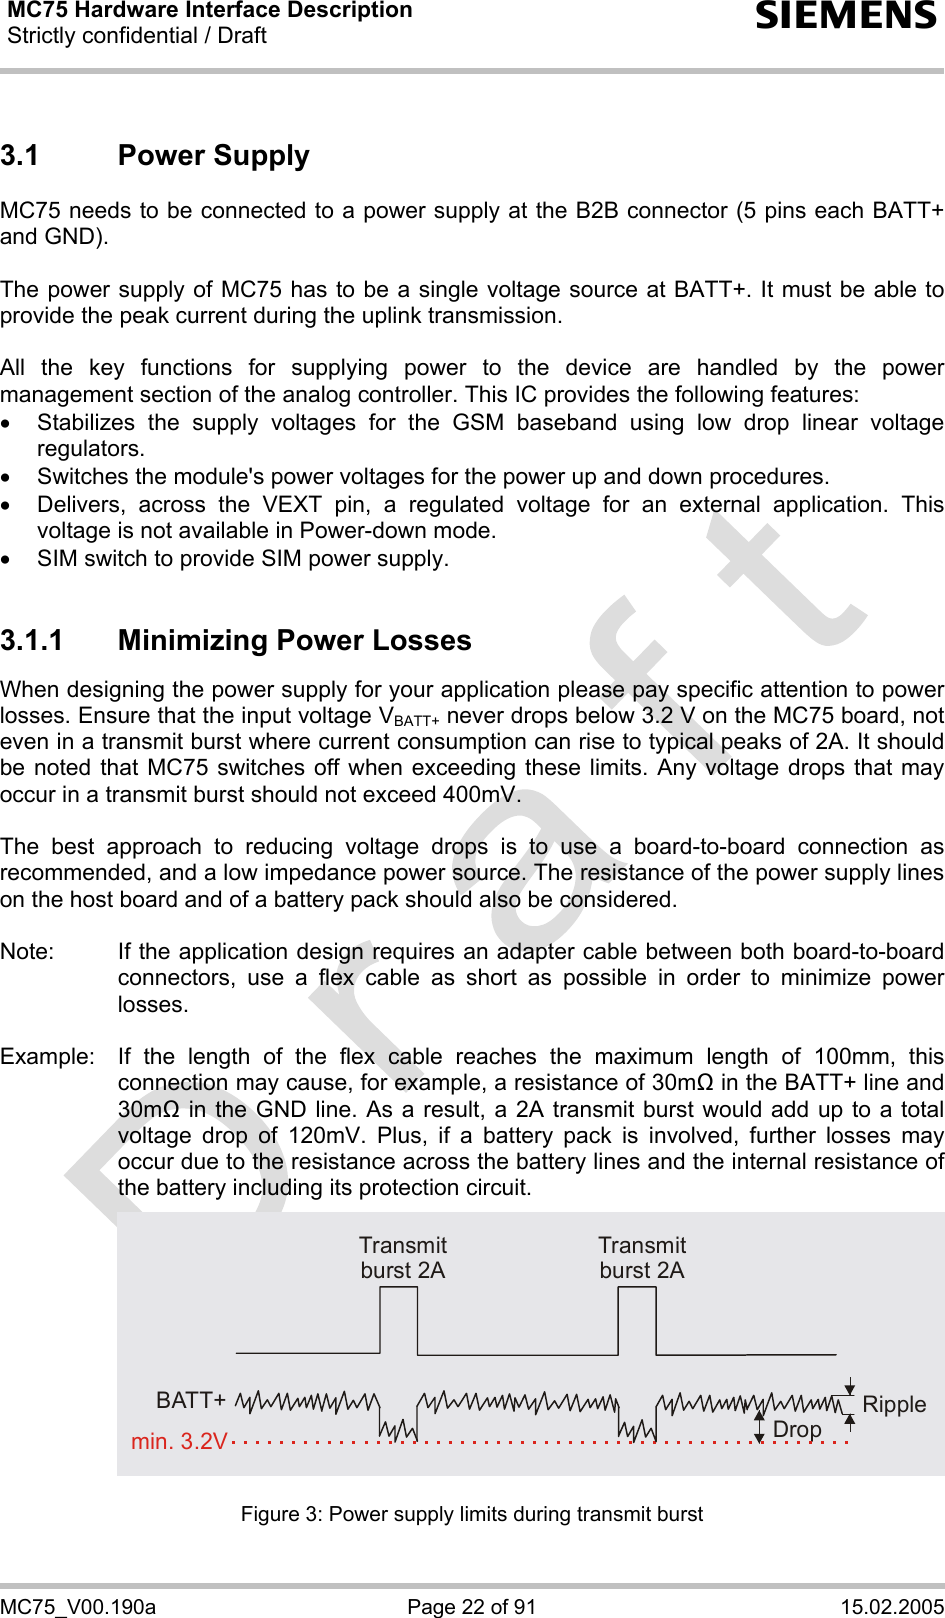 MC75 Hardware Interface Description Strictly confidential / Draft  s MC75_V00.190a  Page 22 of 91  15.02.2005 3.1 Power Supply MC75 needs to be connected to a power supply at the B2B connector (5 pins each BATT+ and GND).   The power supply of MC75 has to be a single voltage source at BATT+. It must be able to provide the peak current during the uplink transmission.   All the key functions for supplying power to the device are handled by the power management section of the analog controller. This IC provides the following features: •  Stabilizes the supply voltages for the GSM baseband using low drop linear voltage regulators. •  Switches the module&apos;s power voltages for the power up and down procedures. •  Delivers, across the VEXT pin, a regulated voltage for an external application. This voltage is not available in Power-down mode. •  SIM switch to provide SIM power supply.  3.1.1  Minimizing Power Losses When designing the power supply for your application please pay specific attention to power losses. Ensure that the input voltage VBATT+ never drops below 3.2 V on the MC75 board, not even in a transmit burst where current consumption can rise to typical peaks of 2A. It should be noted that MC75 switches off when exceeding these limits. Any voltage drops that may occur in a transmit burst should not exceed 400mV.  The best approach to reducing voltage drops is to use a board-to-board connection as recommended, and a low impedance power source. The resistance of the power supply lines on the host board and of a battery pack should also be considered.  Note:  If the application design requires an adapter cable between both board-to-board connectors, use a flex cable as short as possible in order to minimize power losses.   Example:  If the length of the flex cable reaches the maximum length of 100mm, this connection may cause, for example, a resistance of 30m in the BATT+ line and 30m in the GND line. As a result, a 2A transmit burst would add up to a total voltage drop of 120mV. Plus, if a battery pack is involved, further losses may occur due to the resistance across the battery lines and the internal resistance of the battery including its protection circuit.             Figure 3: Power supply limits during transmit burst Transmit burst 2ATransmit burst 2ARippleDropmin. 3.2VBATT+